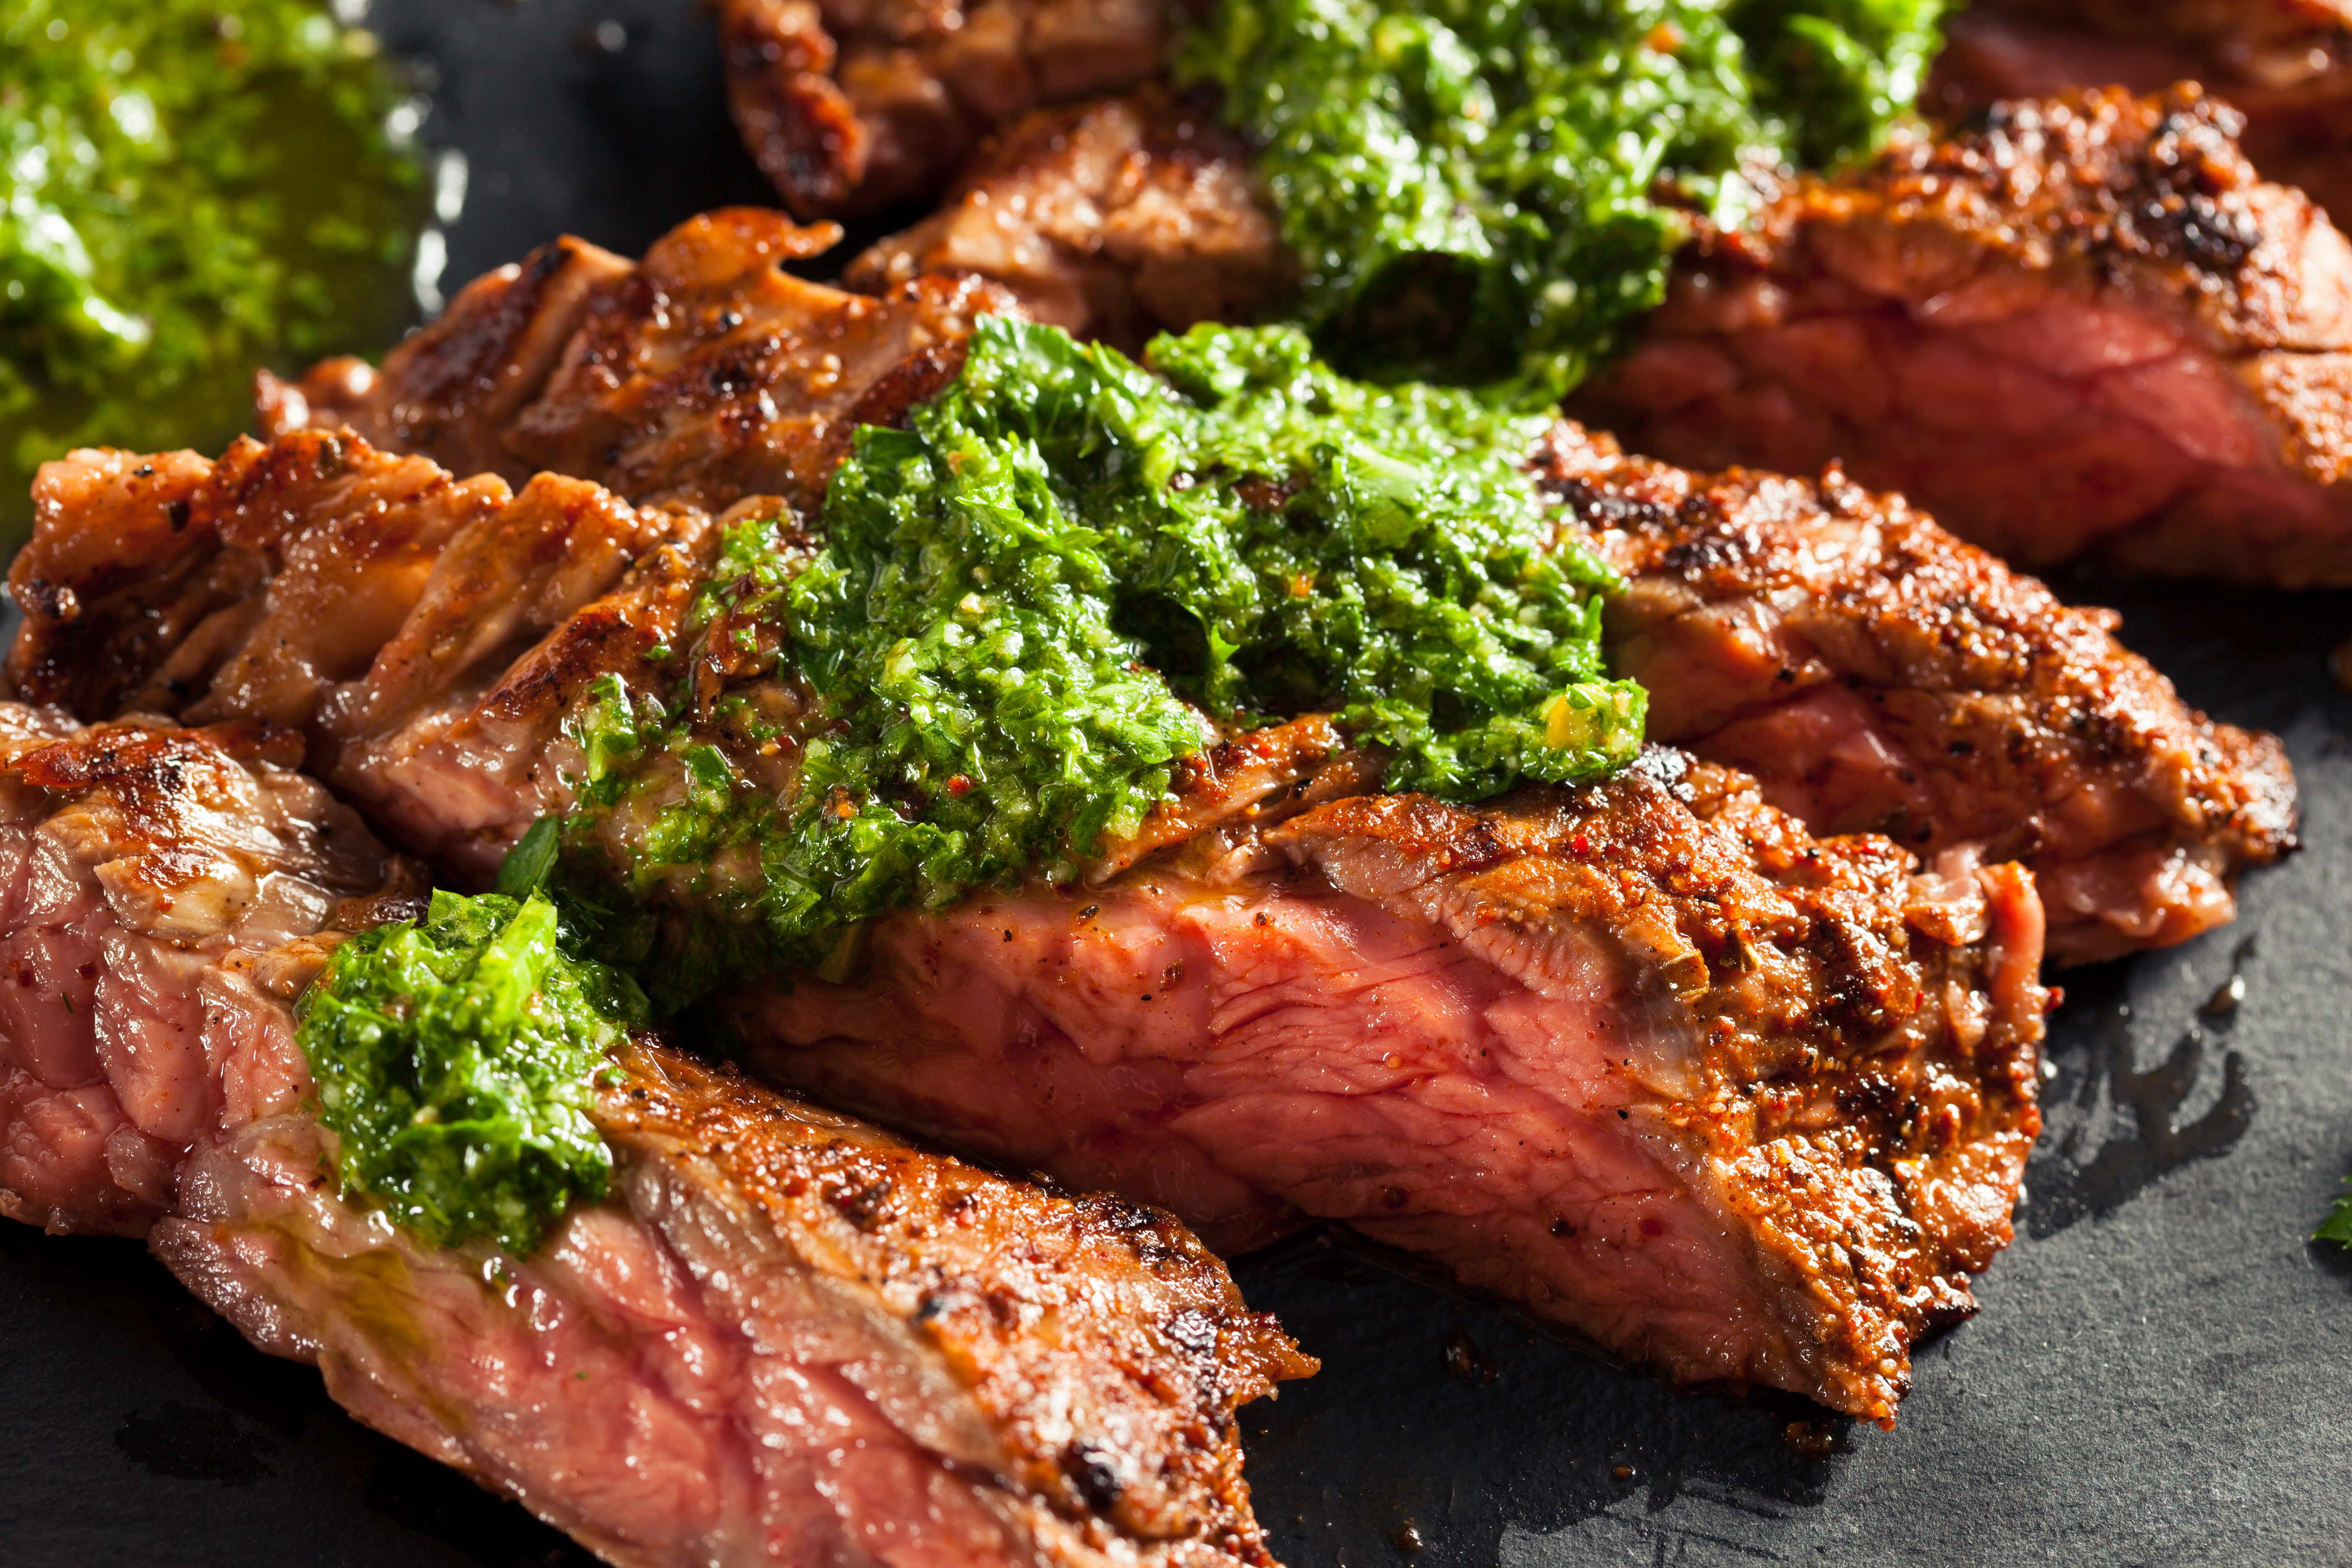 Holiday Cast Iron Steak with Chimichurri Sauce-AS SEEN ON TAMRON HALL SHOW